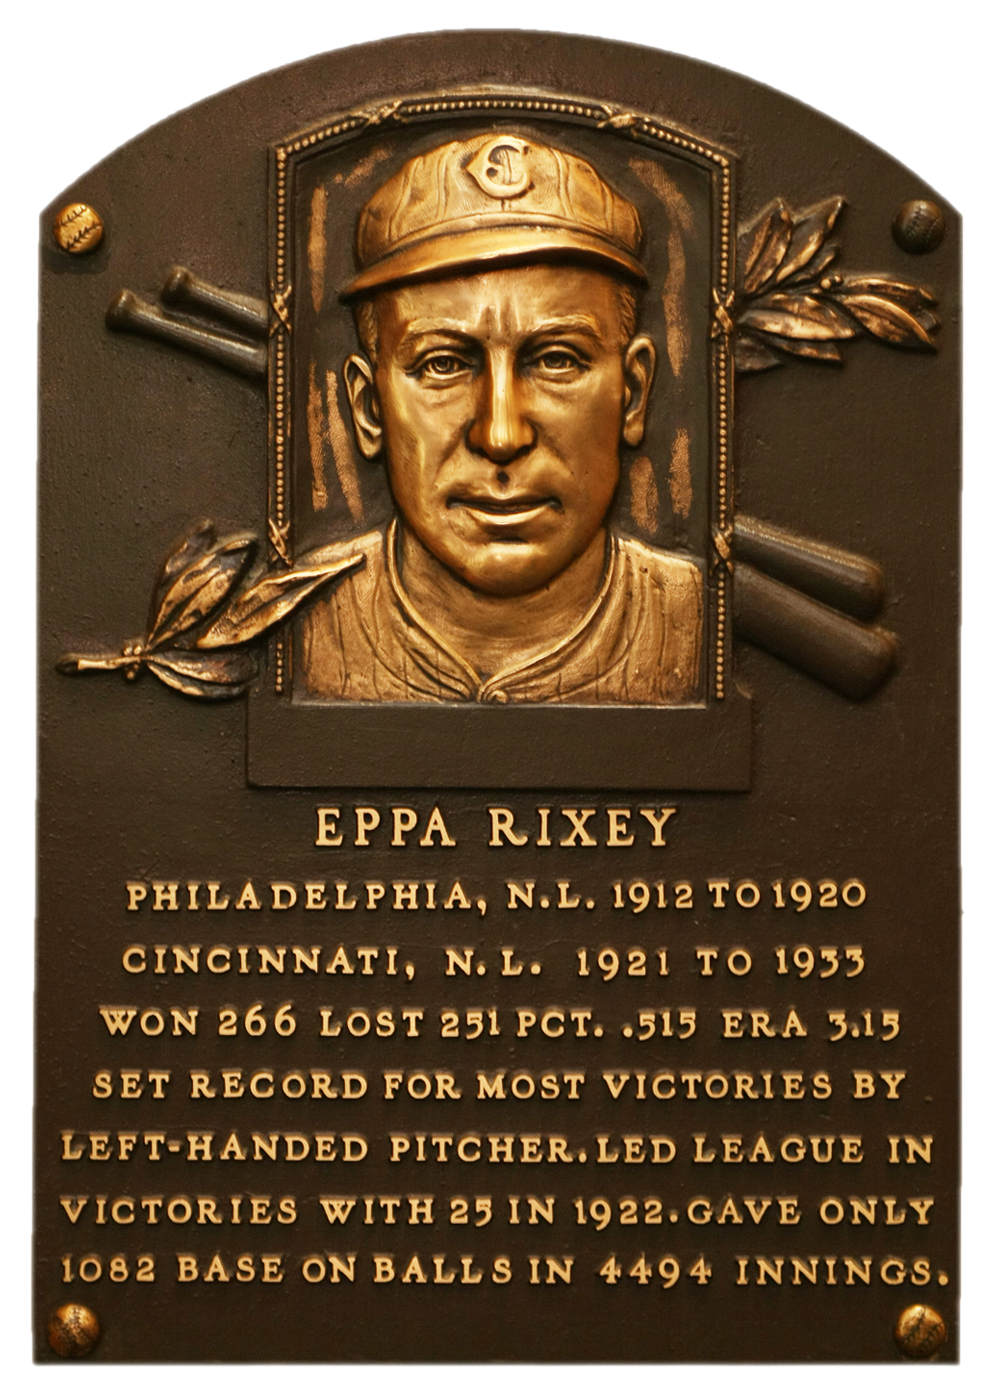 Eppa Rixey Hall of Fame plaque